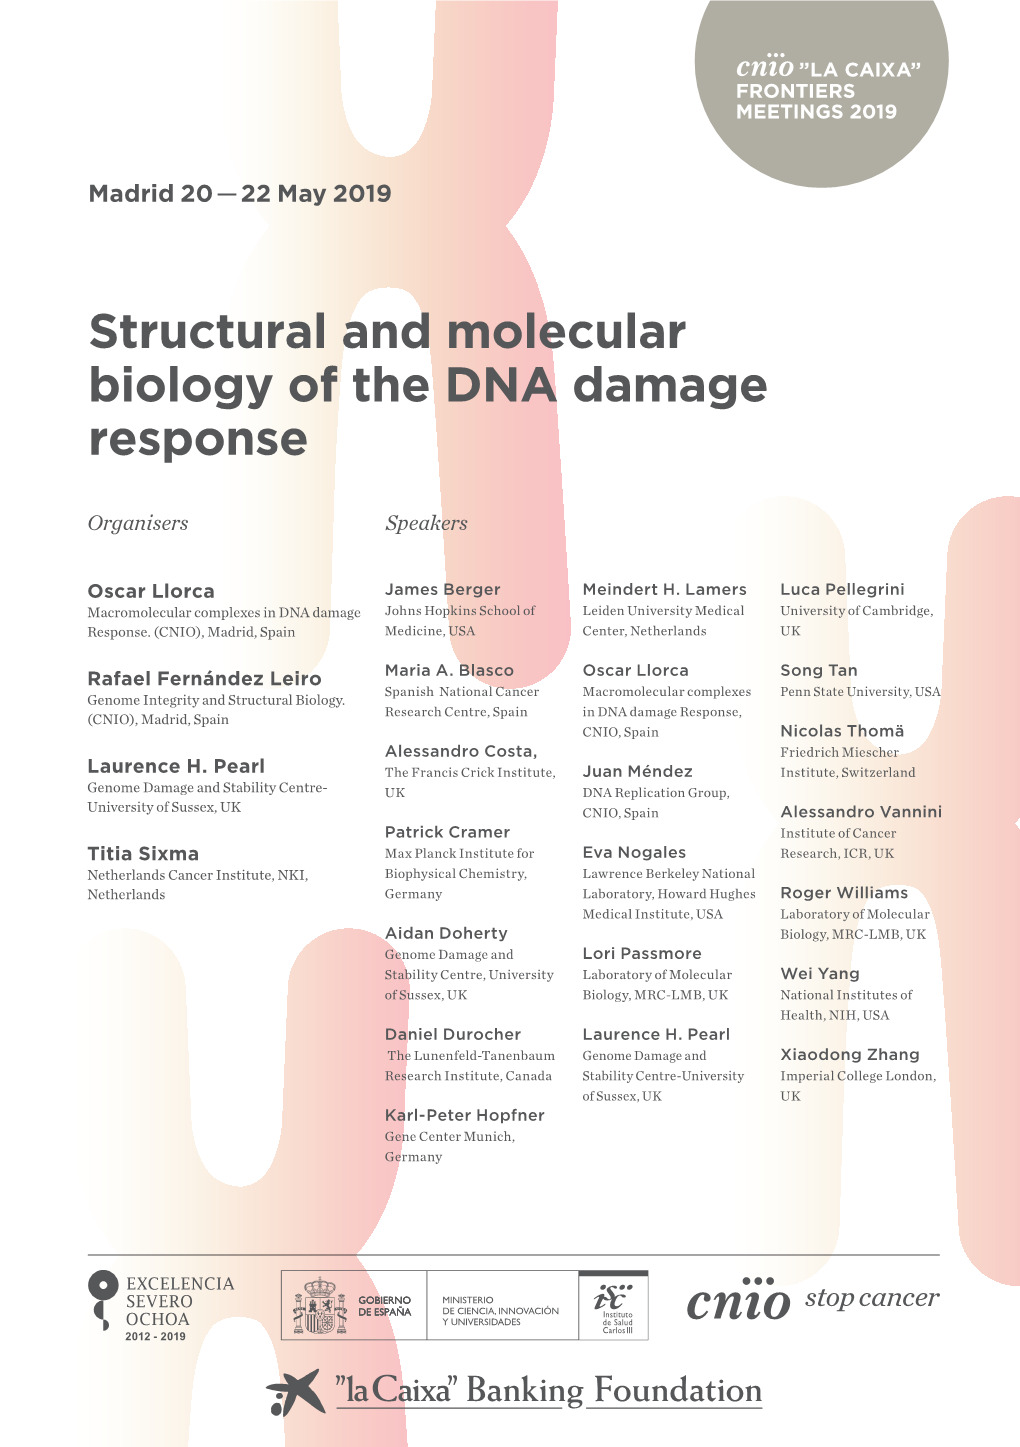 Structural and Molecular Biology of the DNA Damage Response